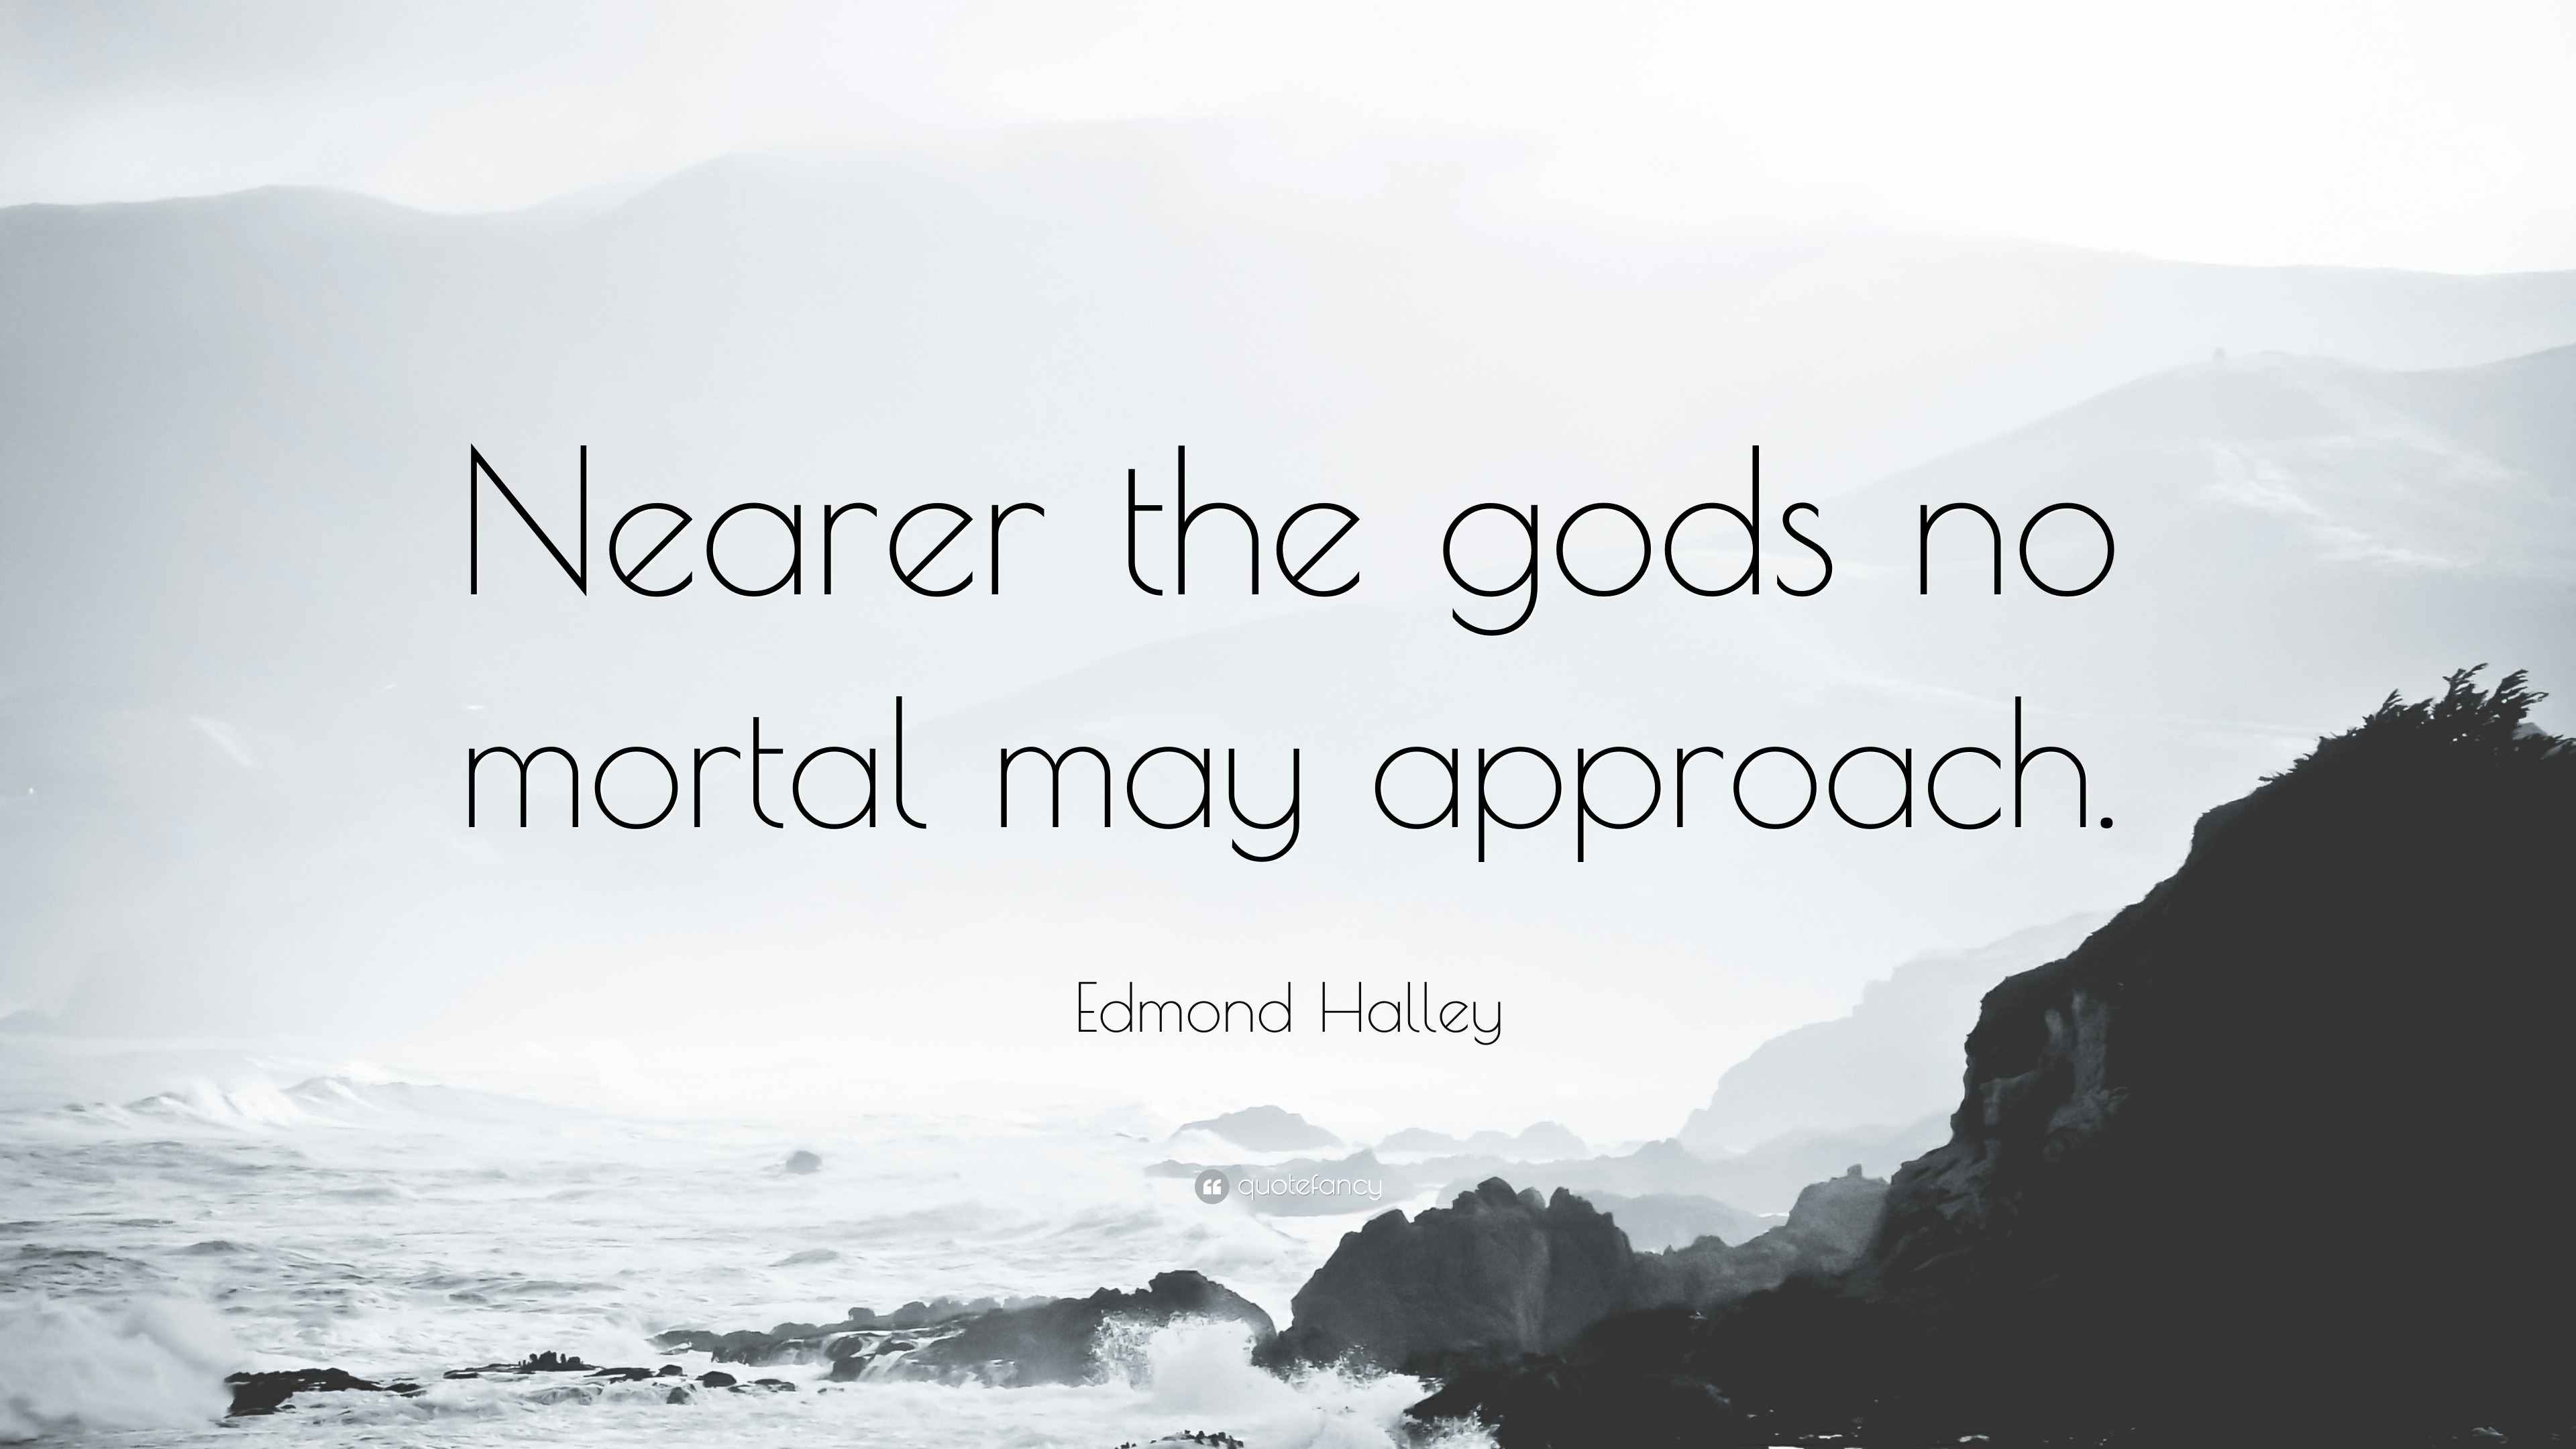 Edmond Halley Quote: “Nearer the gods no mortal may approach.” (9 ...